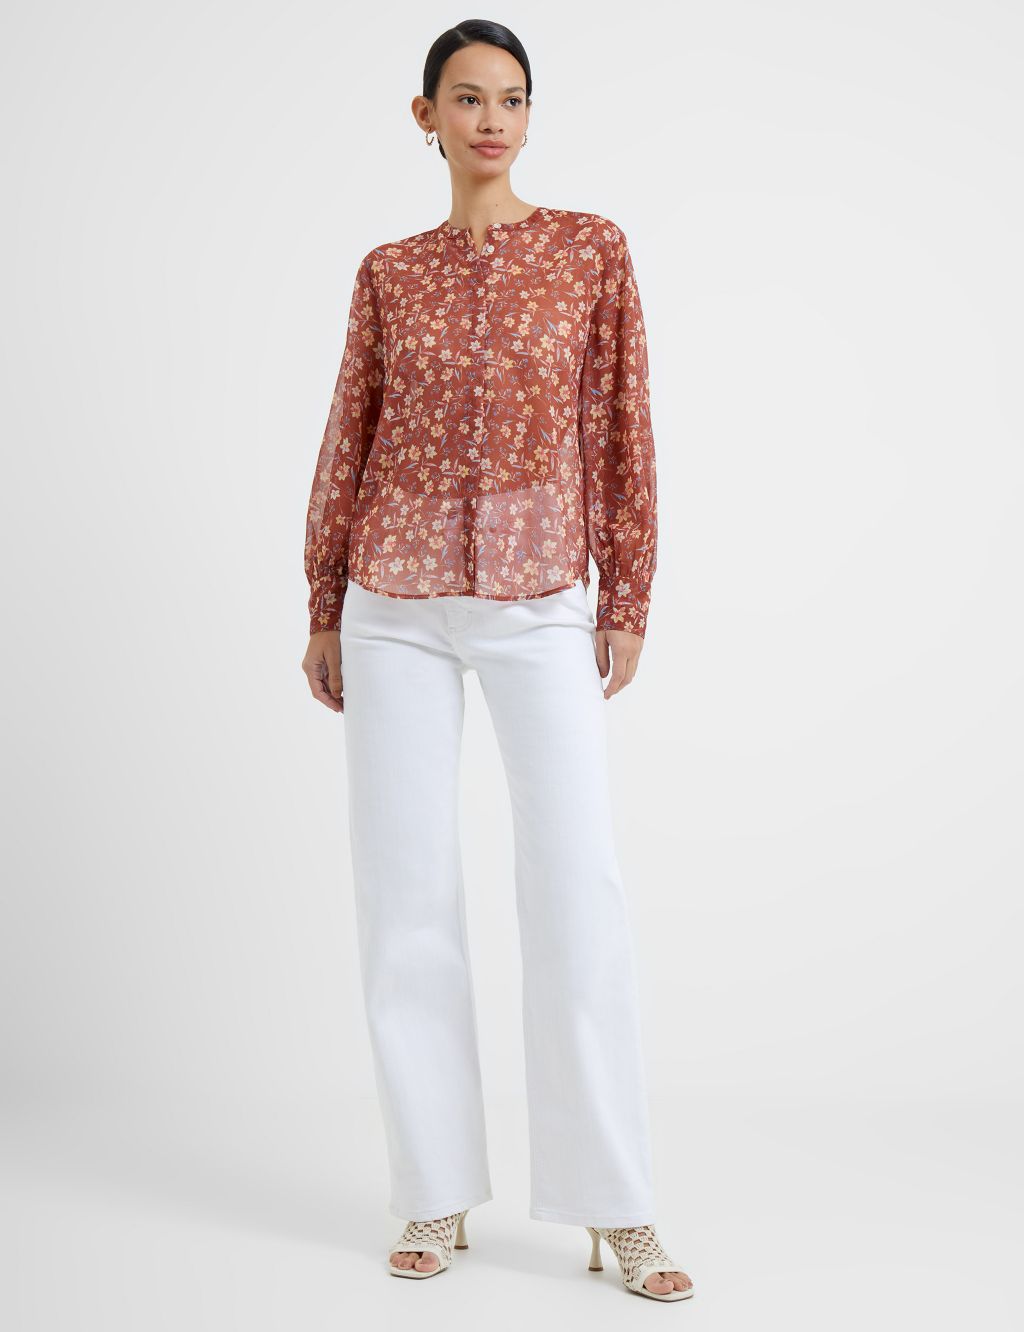 Sheer Floral Relaxed Shirt image 2